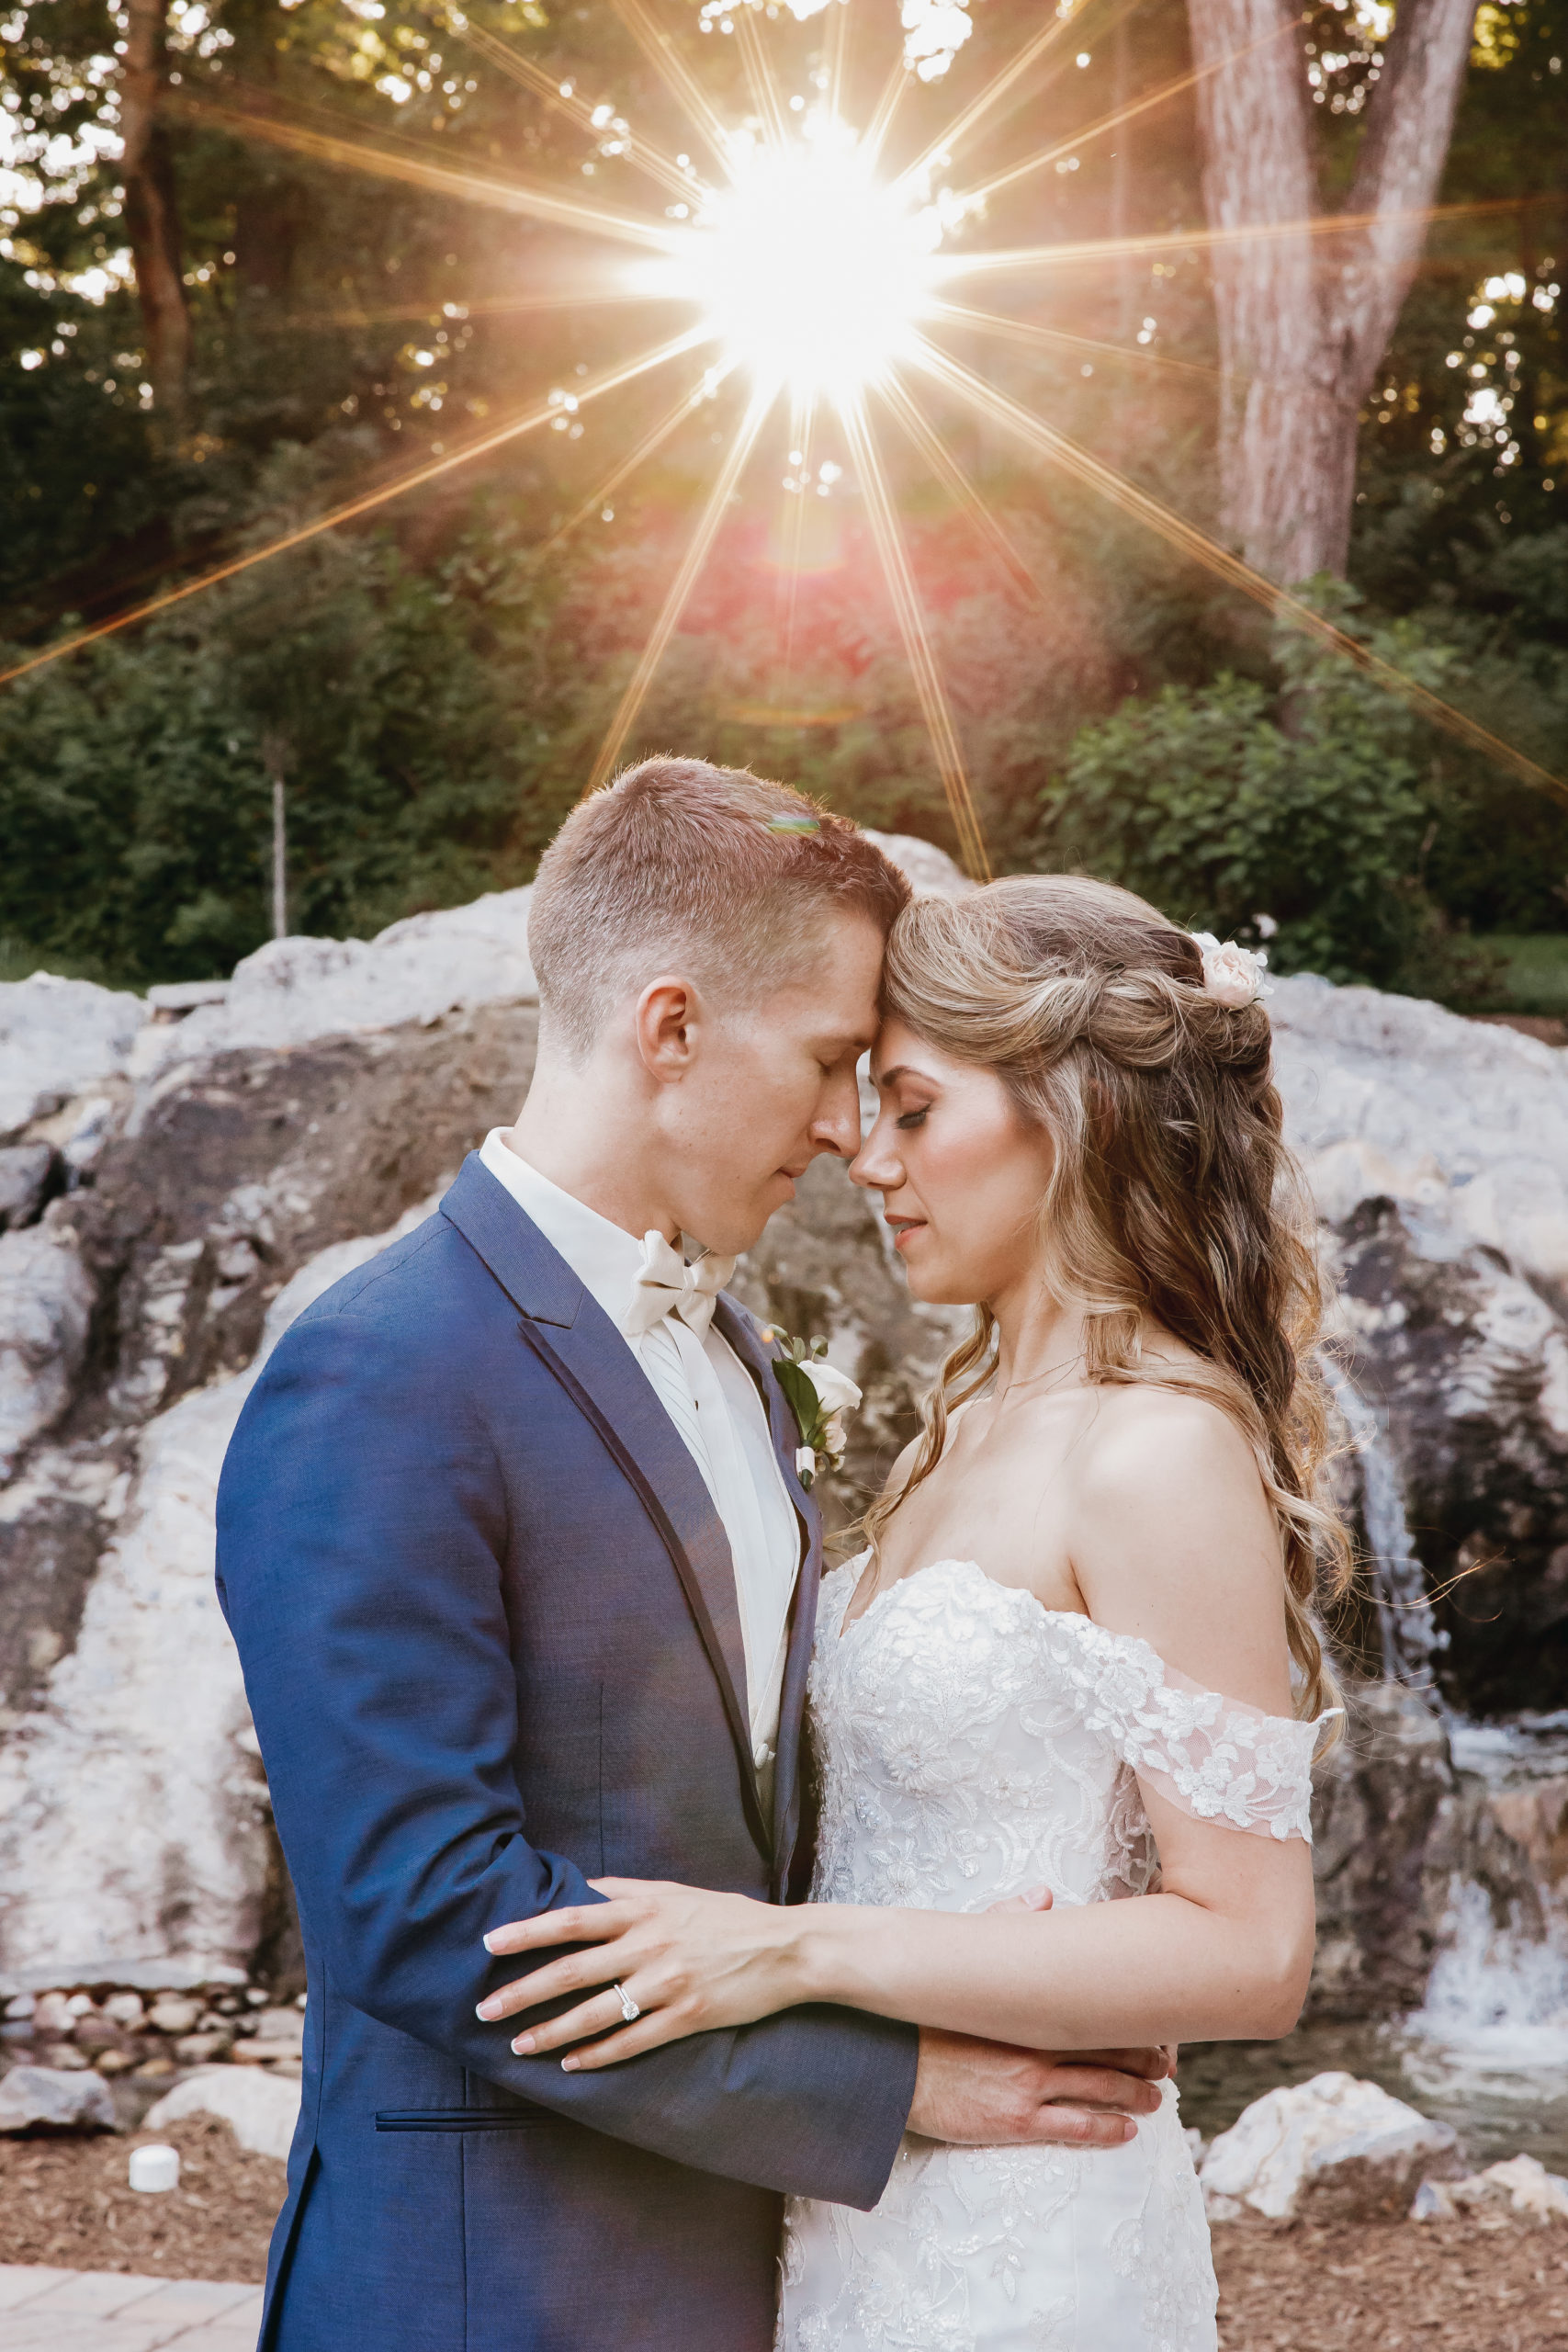 Couple sharing an embrace with light shining behind them, taken by Rachel Yearick Photography